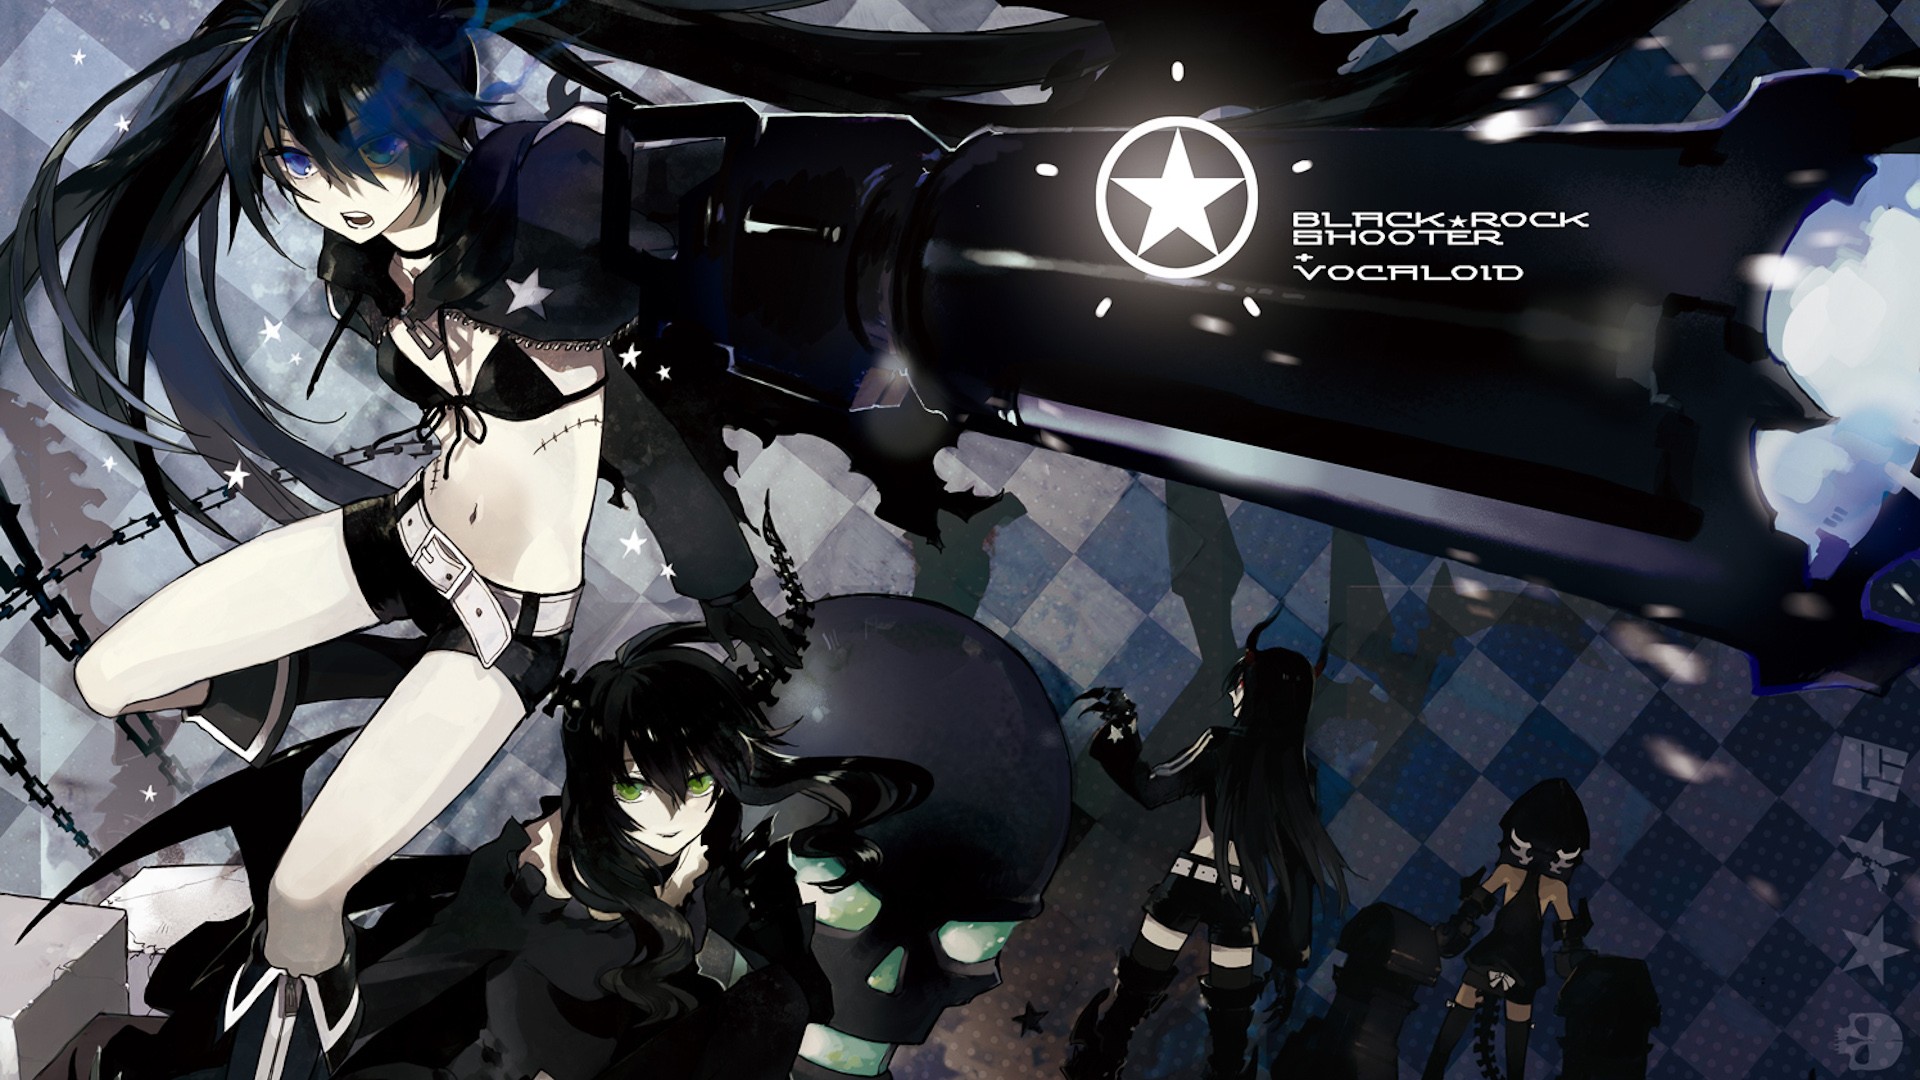 Black Rock Shooter Anime Vocaloid Wallpapers HD Desktop And Mobile Backgrounds